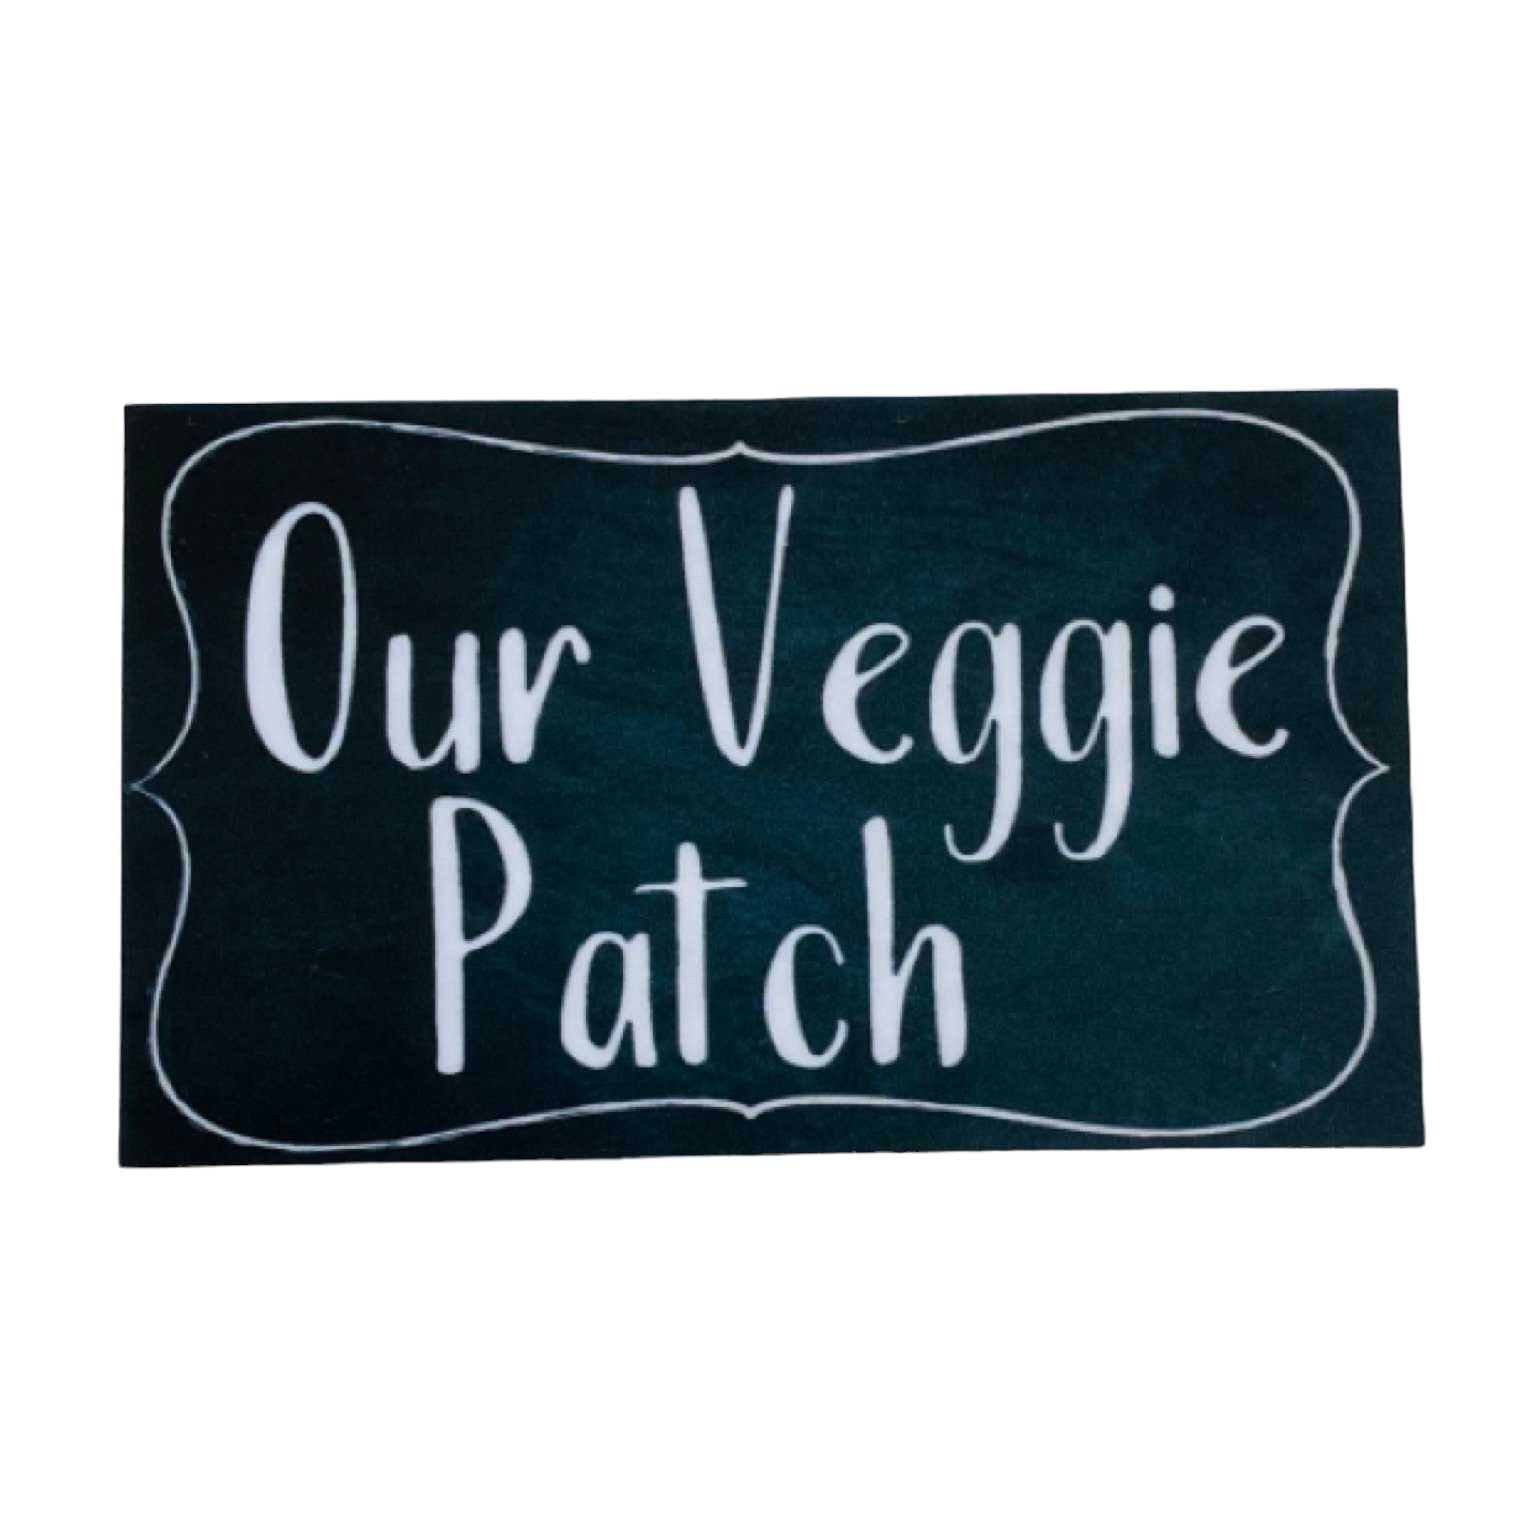 Our Veggie Patch Vintage Black Sign - The Renmy Store Homewares & Gifts 